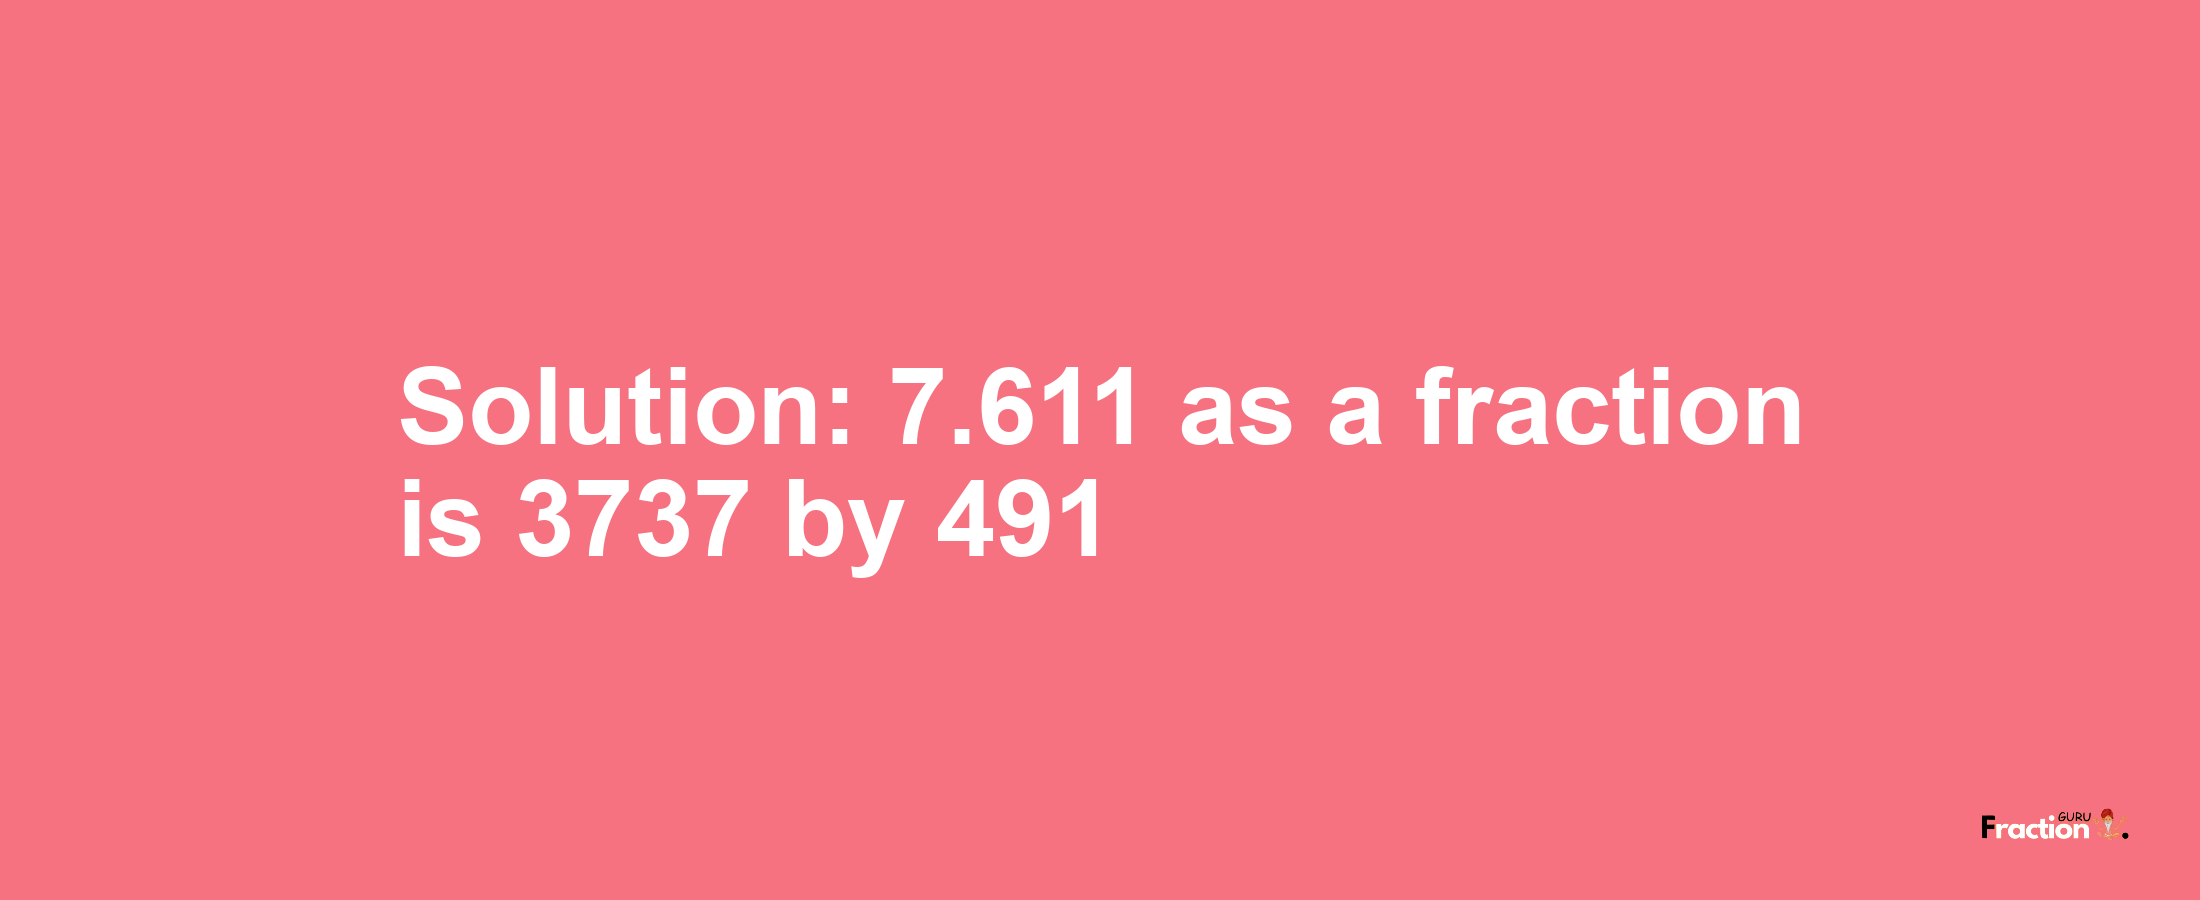 Solution:7.611 as a fraction is 3737/491